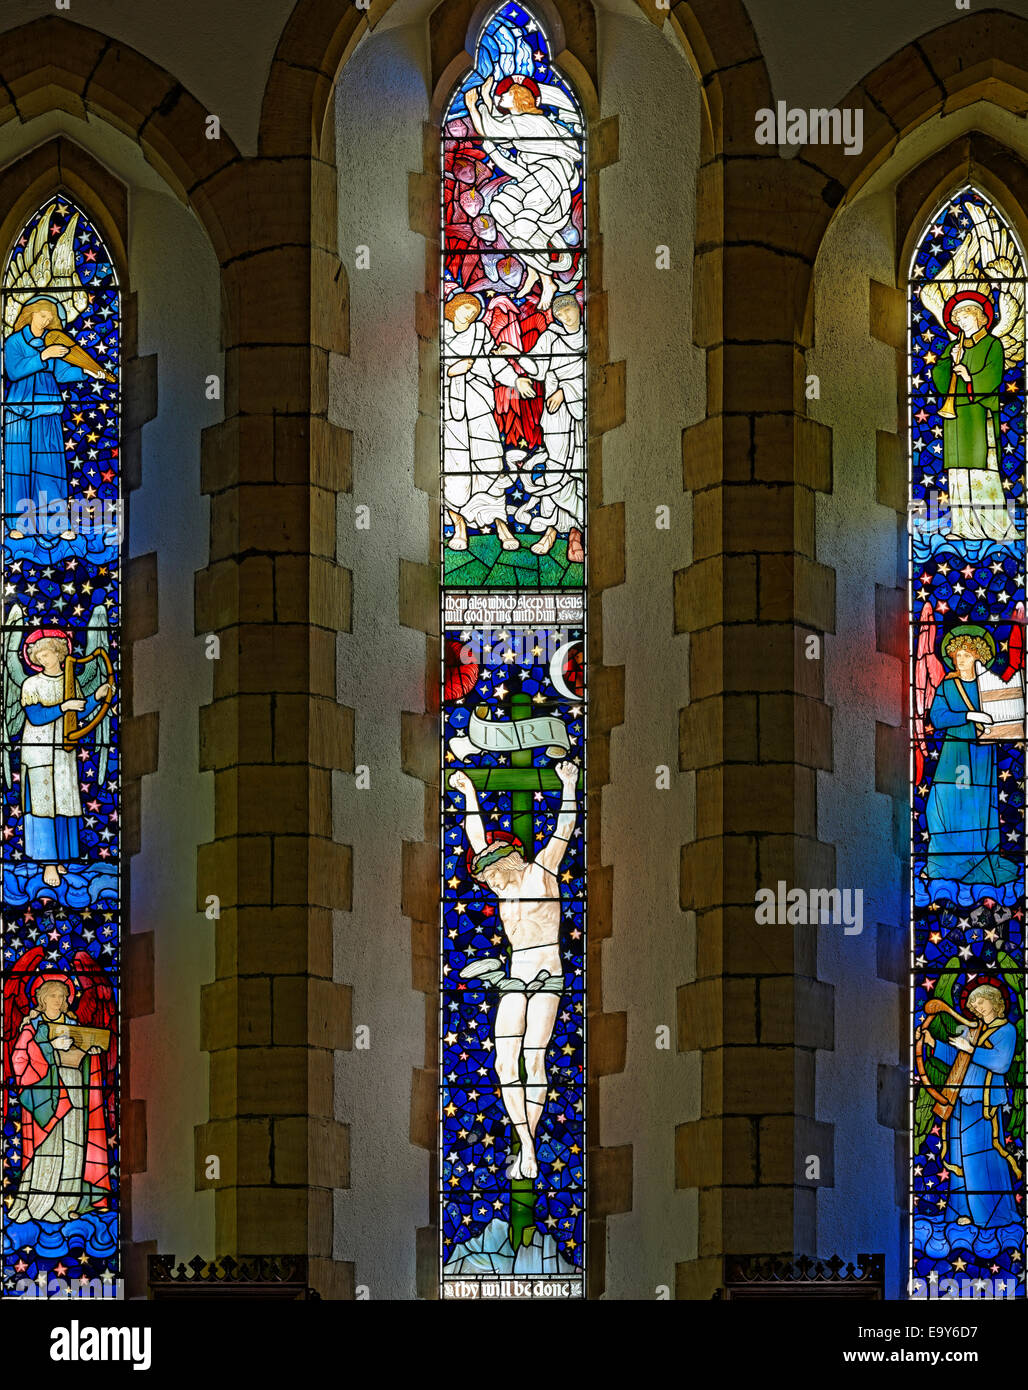 'Christ's crucifixion and ascent into heaven' by Edward Burne Jones and William Morris, Staveley Church, Lake District, England Stock Photo